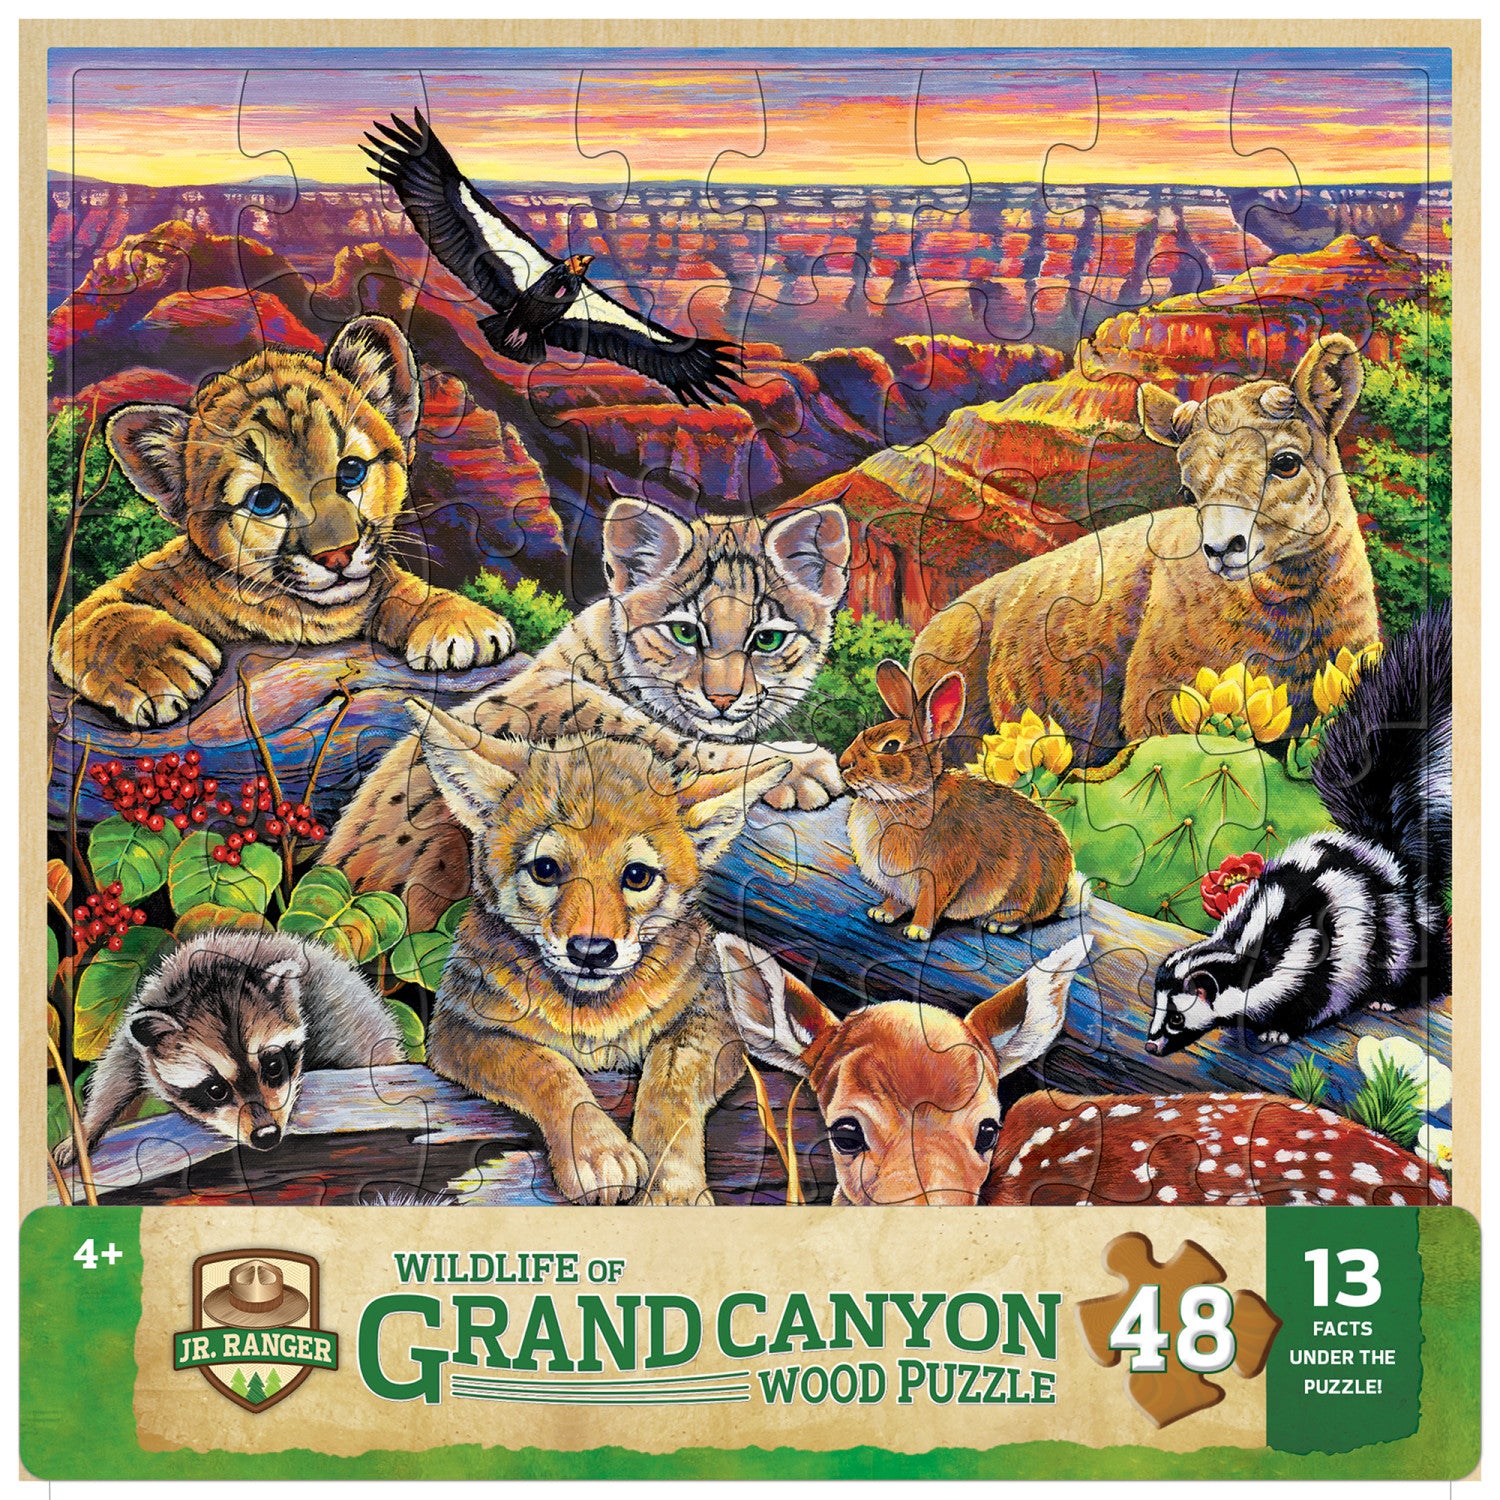 Wood Fun Facts - Grand Canyon Wildlife 48 Piece Kids Puzzle